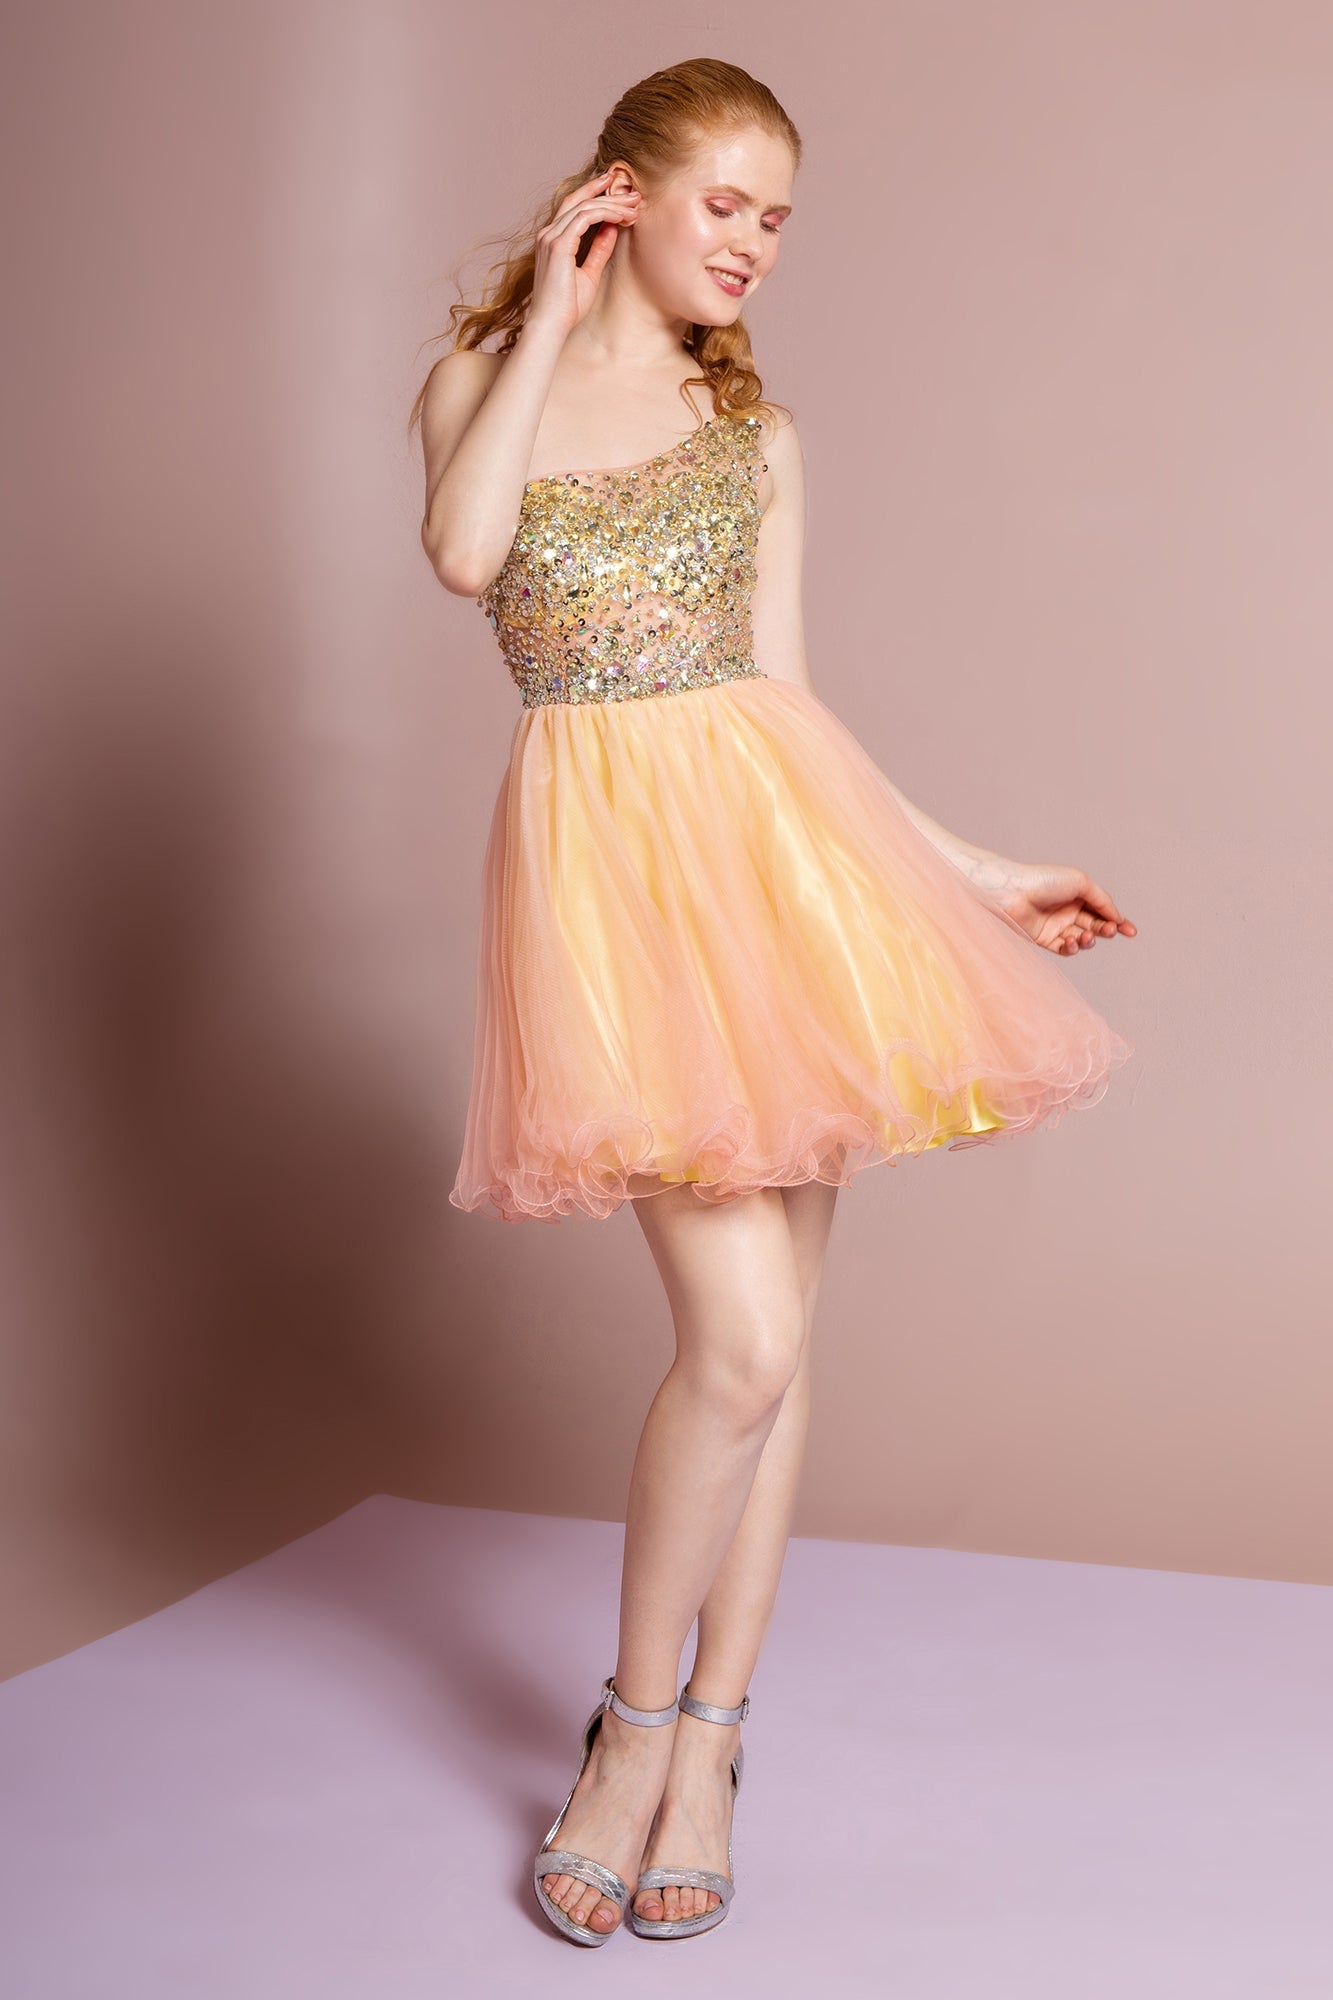 One Shoulder Rolled Hem Short Dress with Jewel Embellished Bodice GLGS2033 Elsy Style HOMECOMING